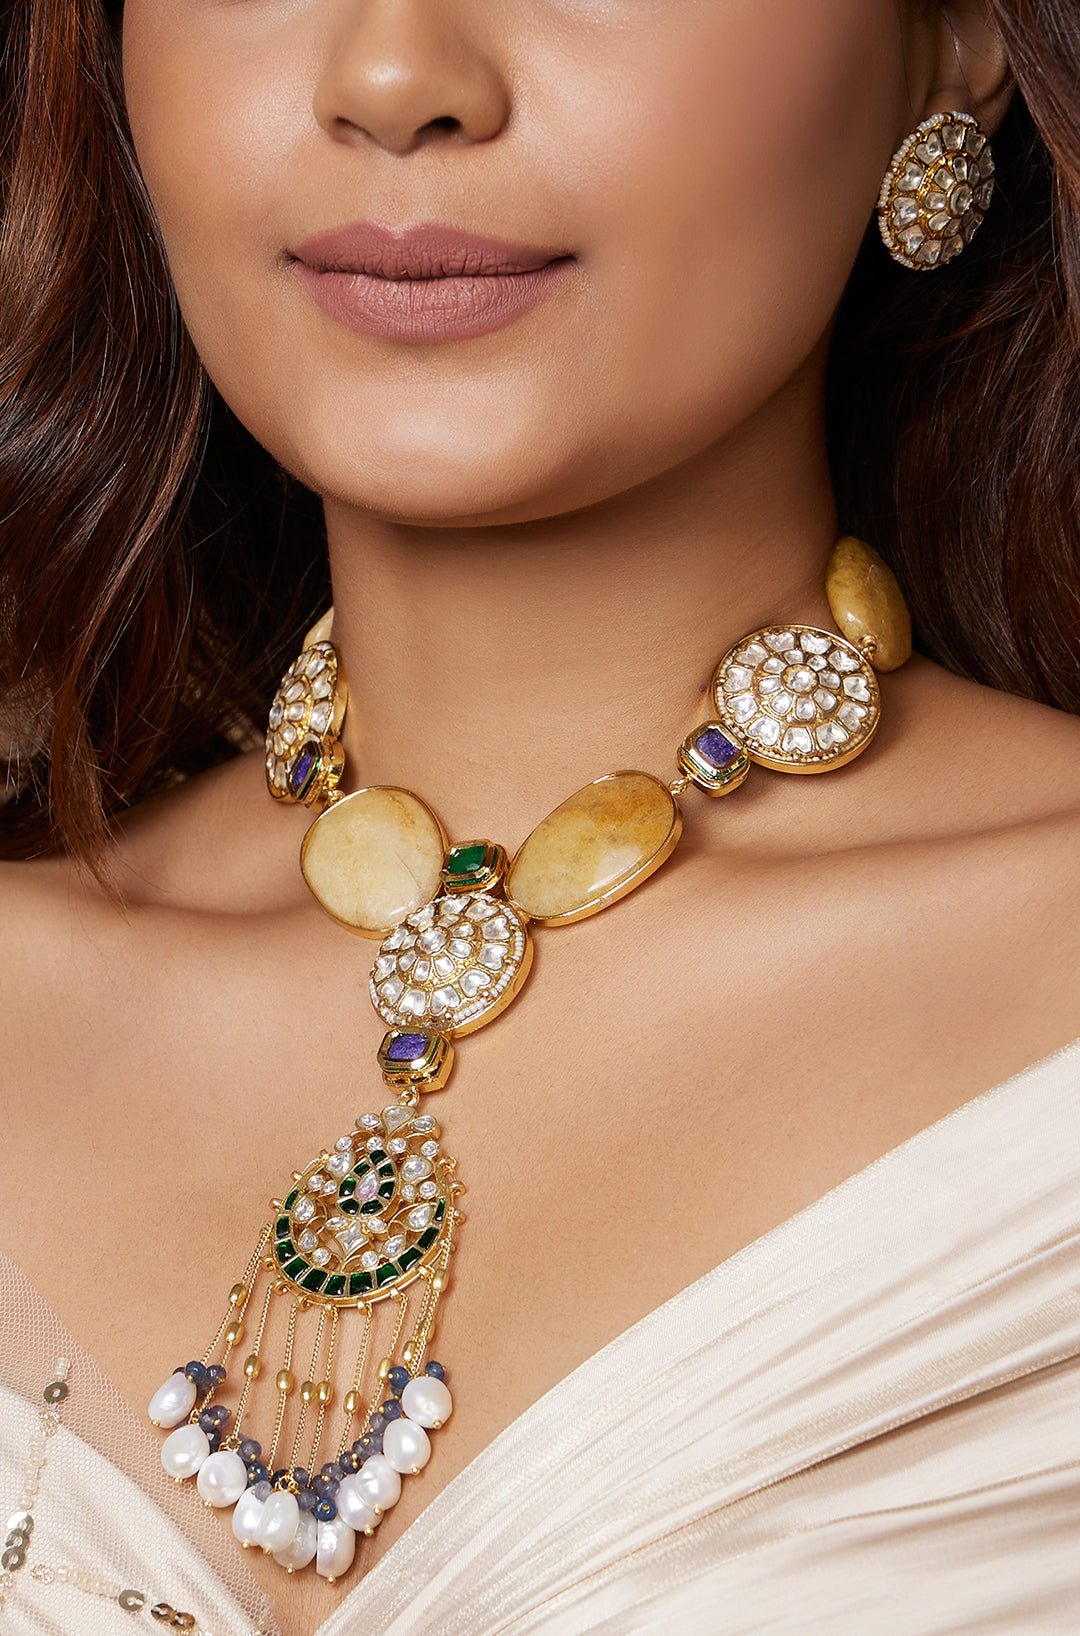 Load image into Gallery viewer, Kundan Polki Necklace Set With Yellow Agates - Joules by Radhika
